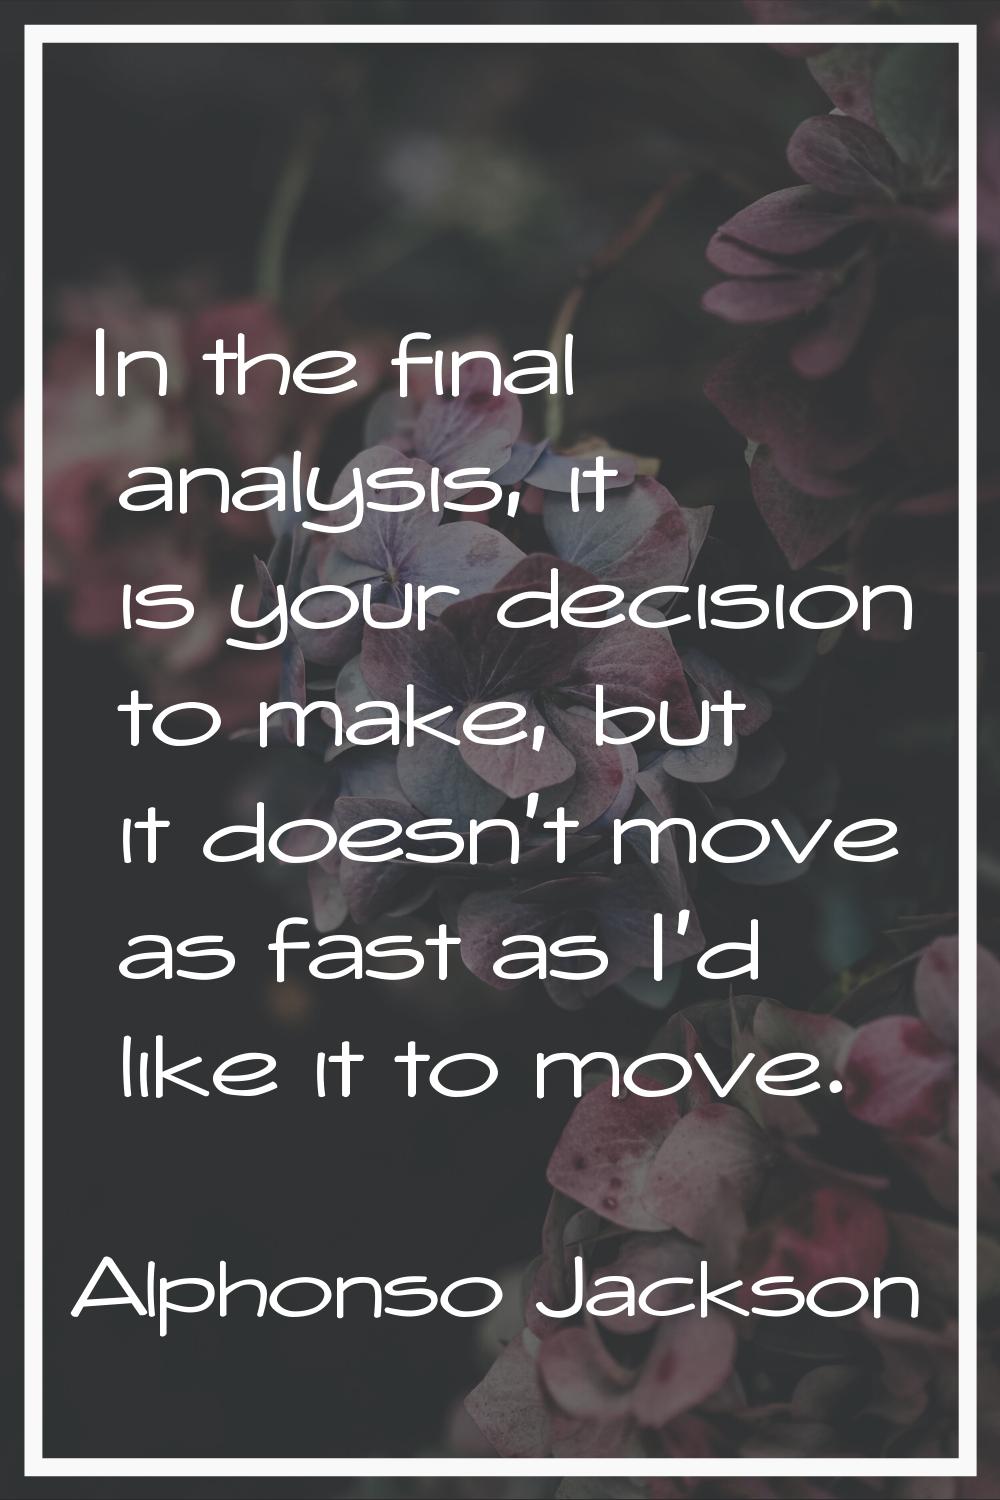 In the final analysis, it is your decision to make, but it doesn't move as fast as I'd like it to m